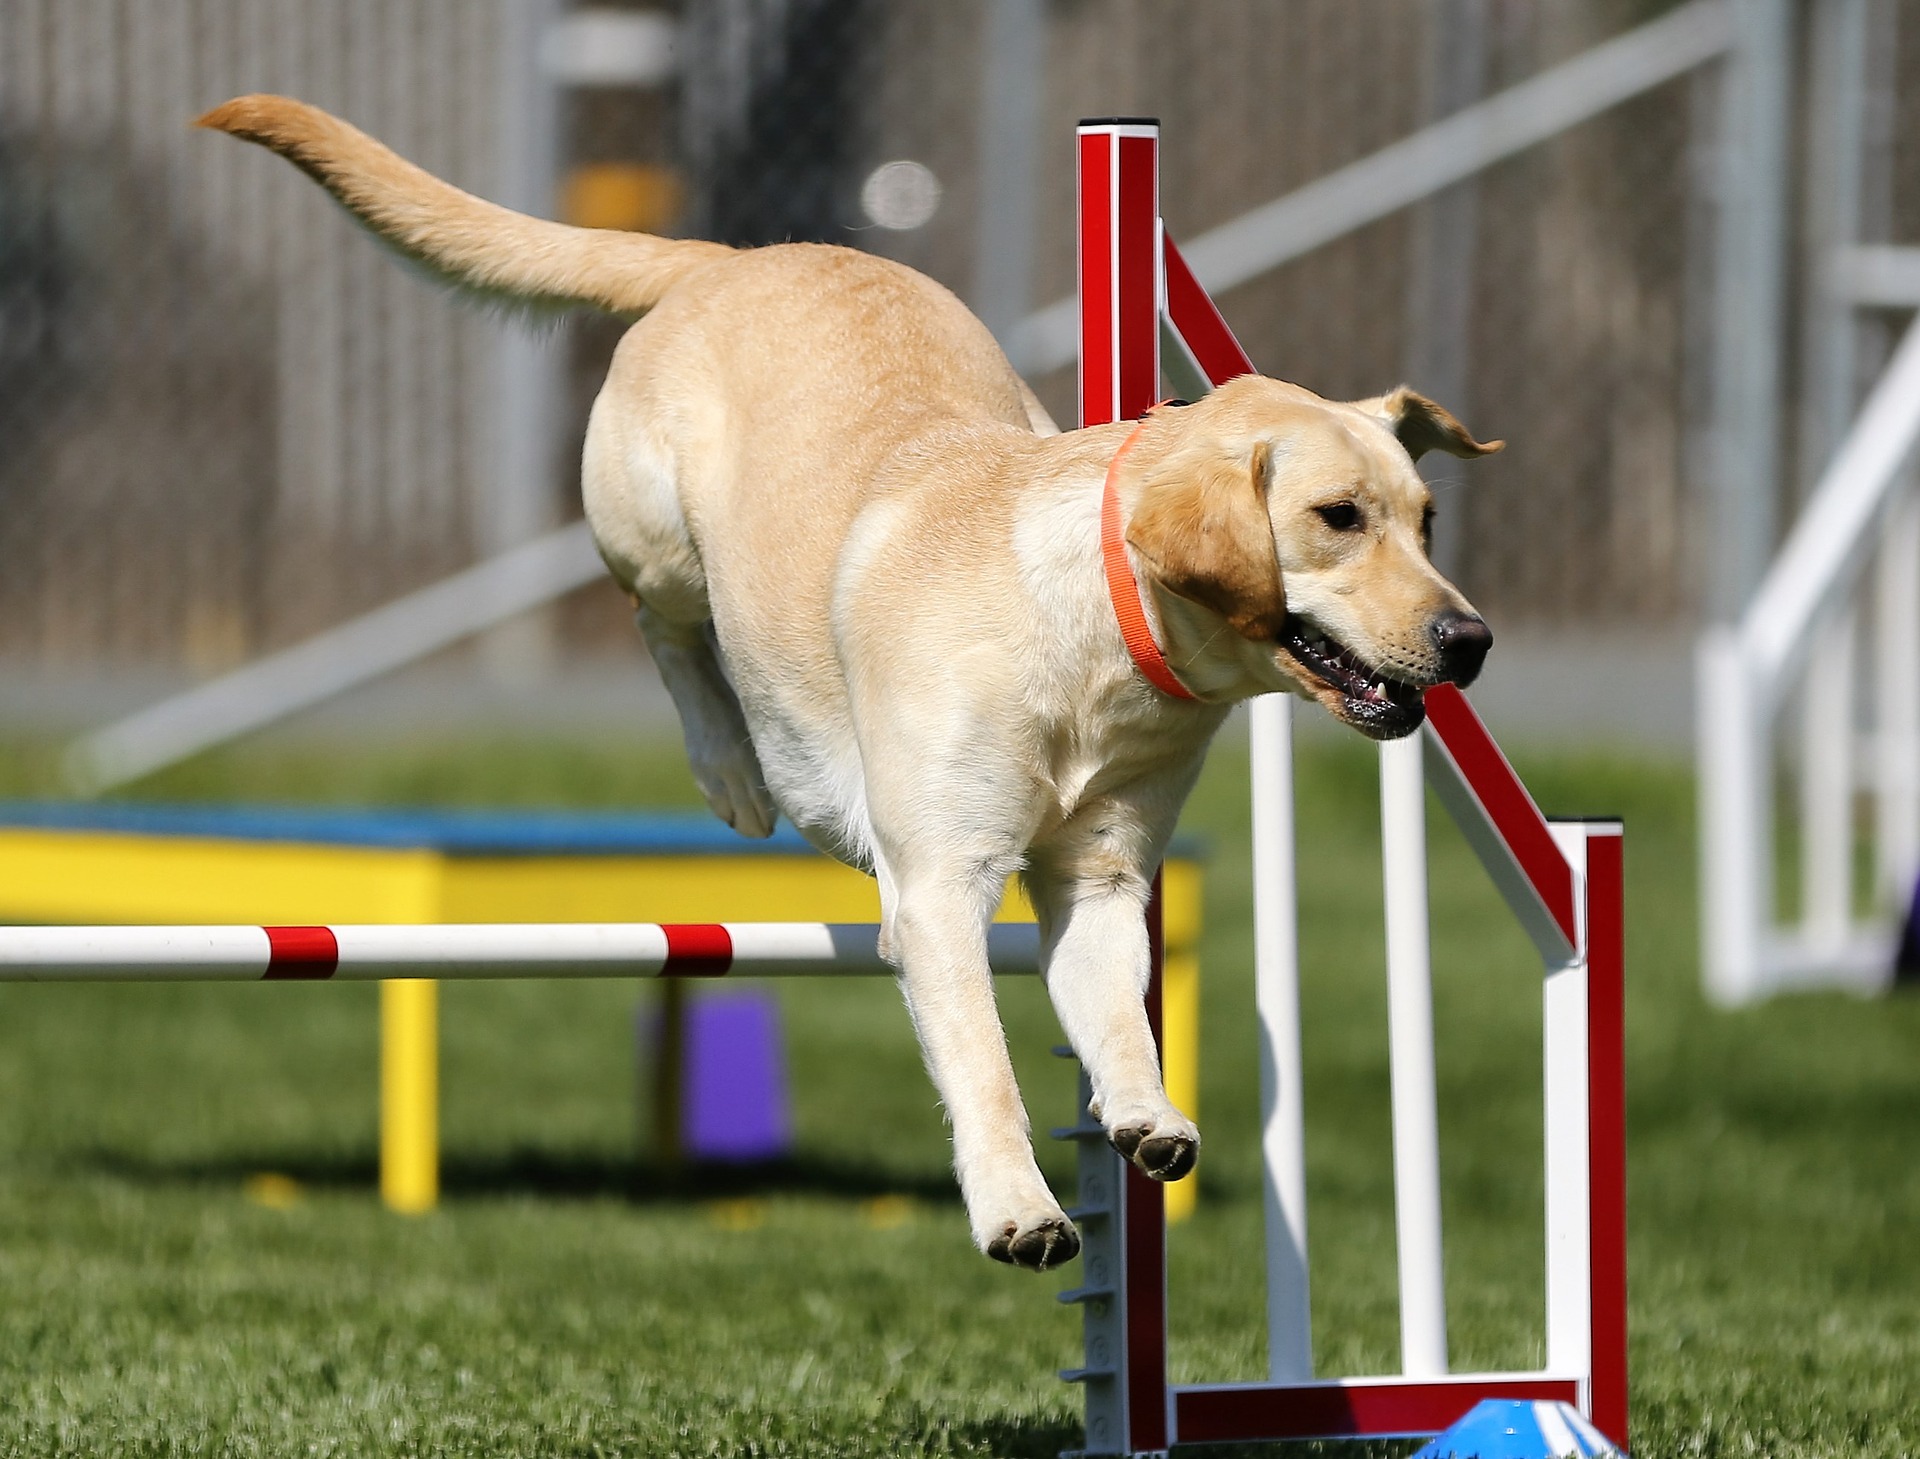 A dog running an obstacle course